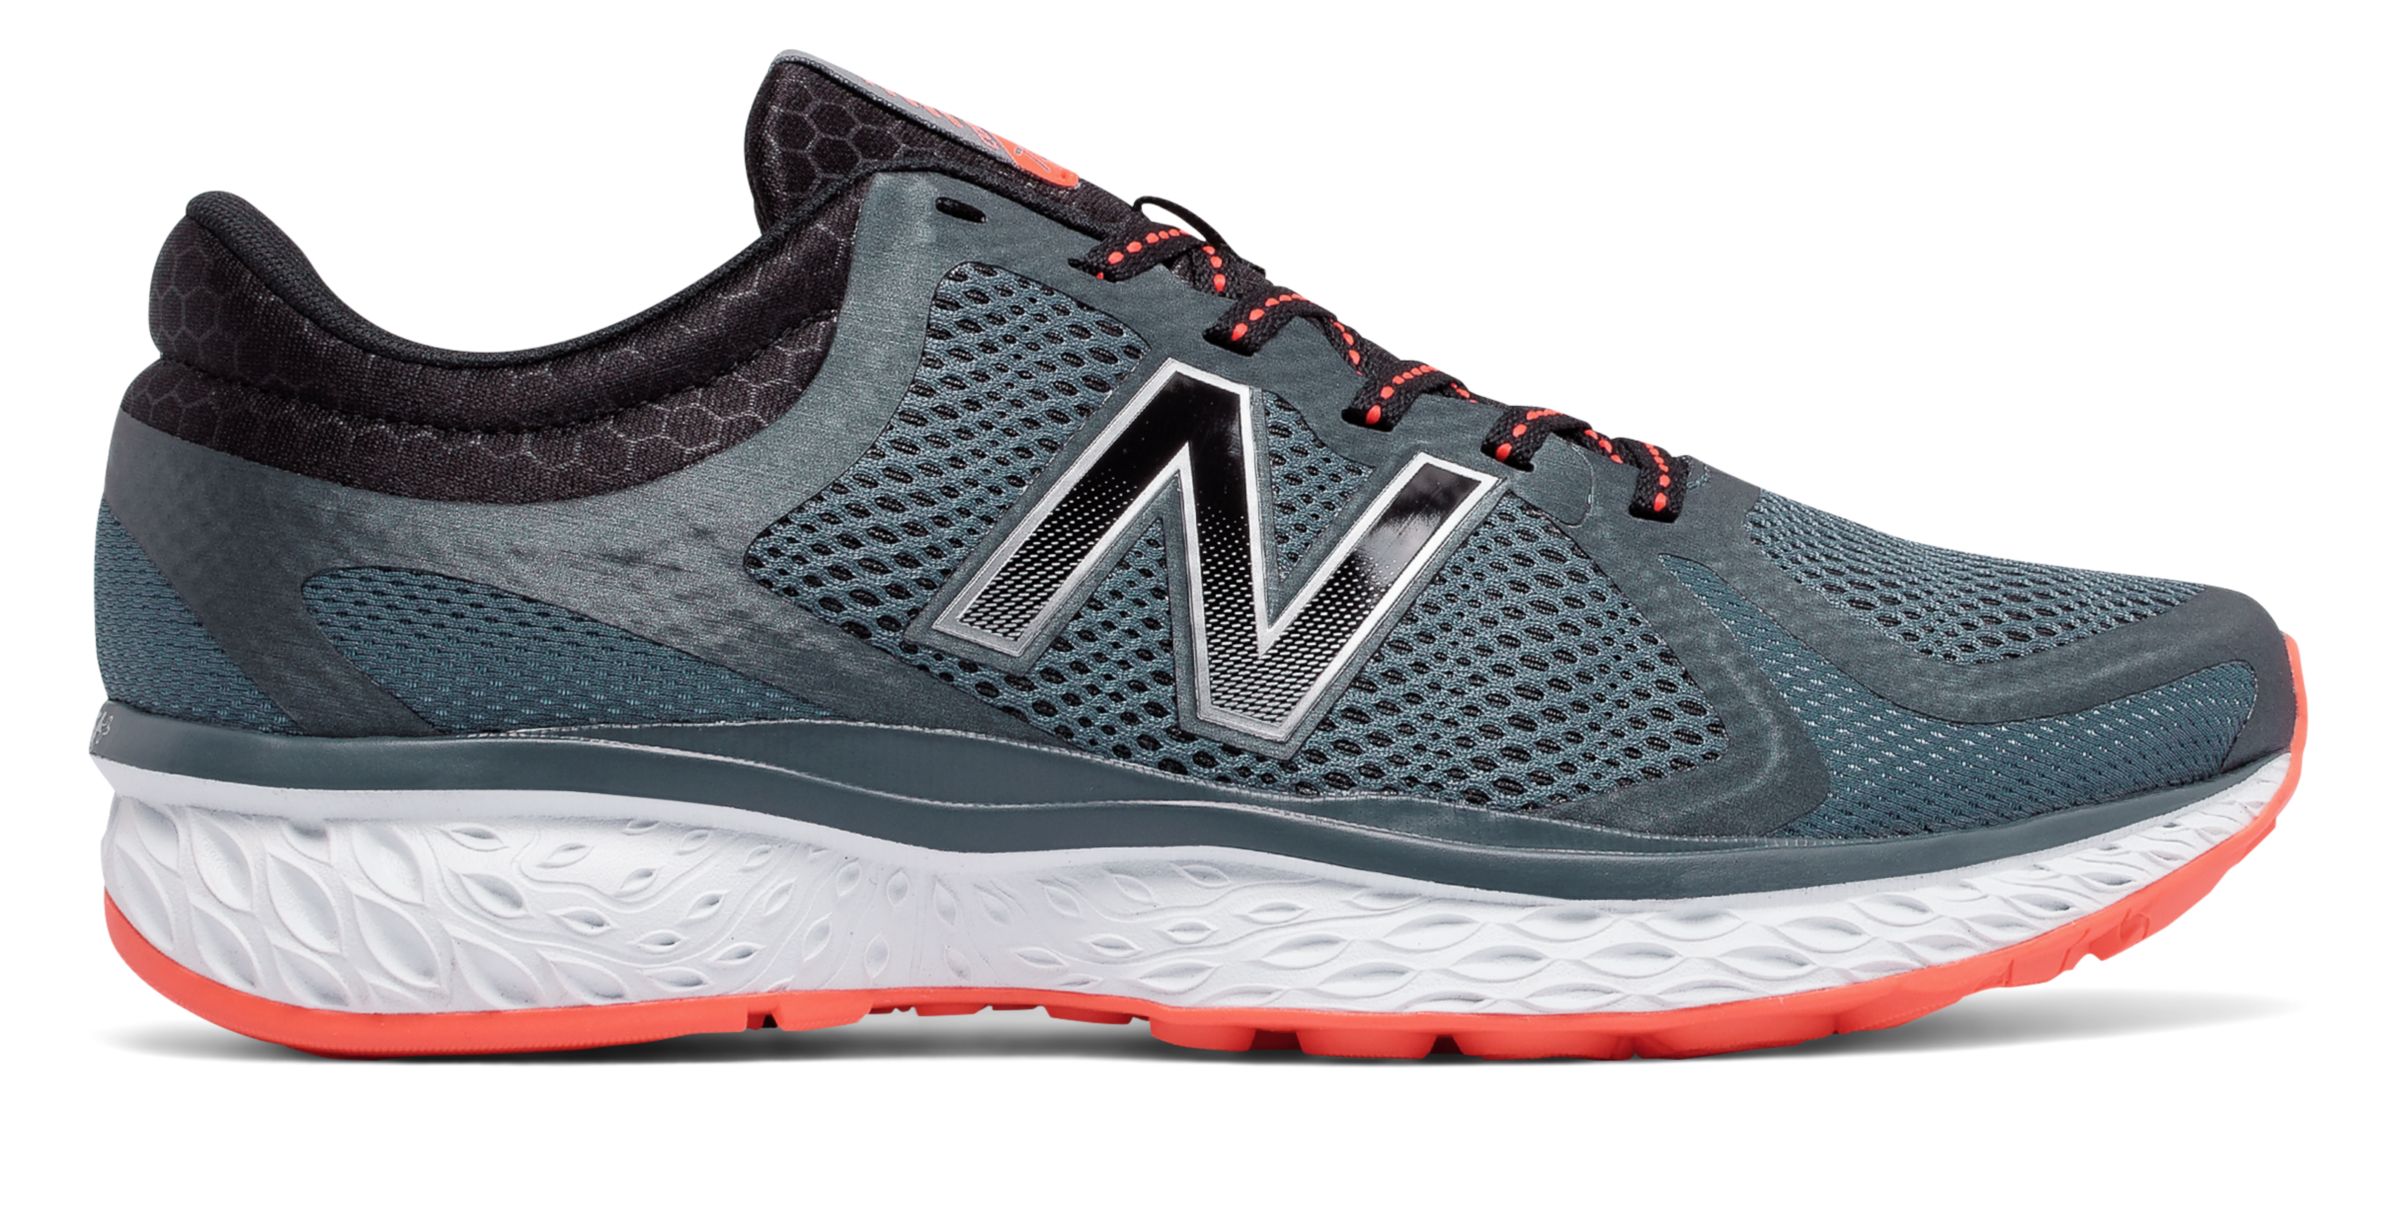 New Balance M720-V4 on Sale - Discounts Up to 25% Off on M720LT4 at Joe's New  Balance Outlet